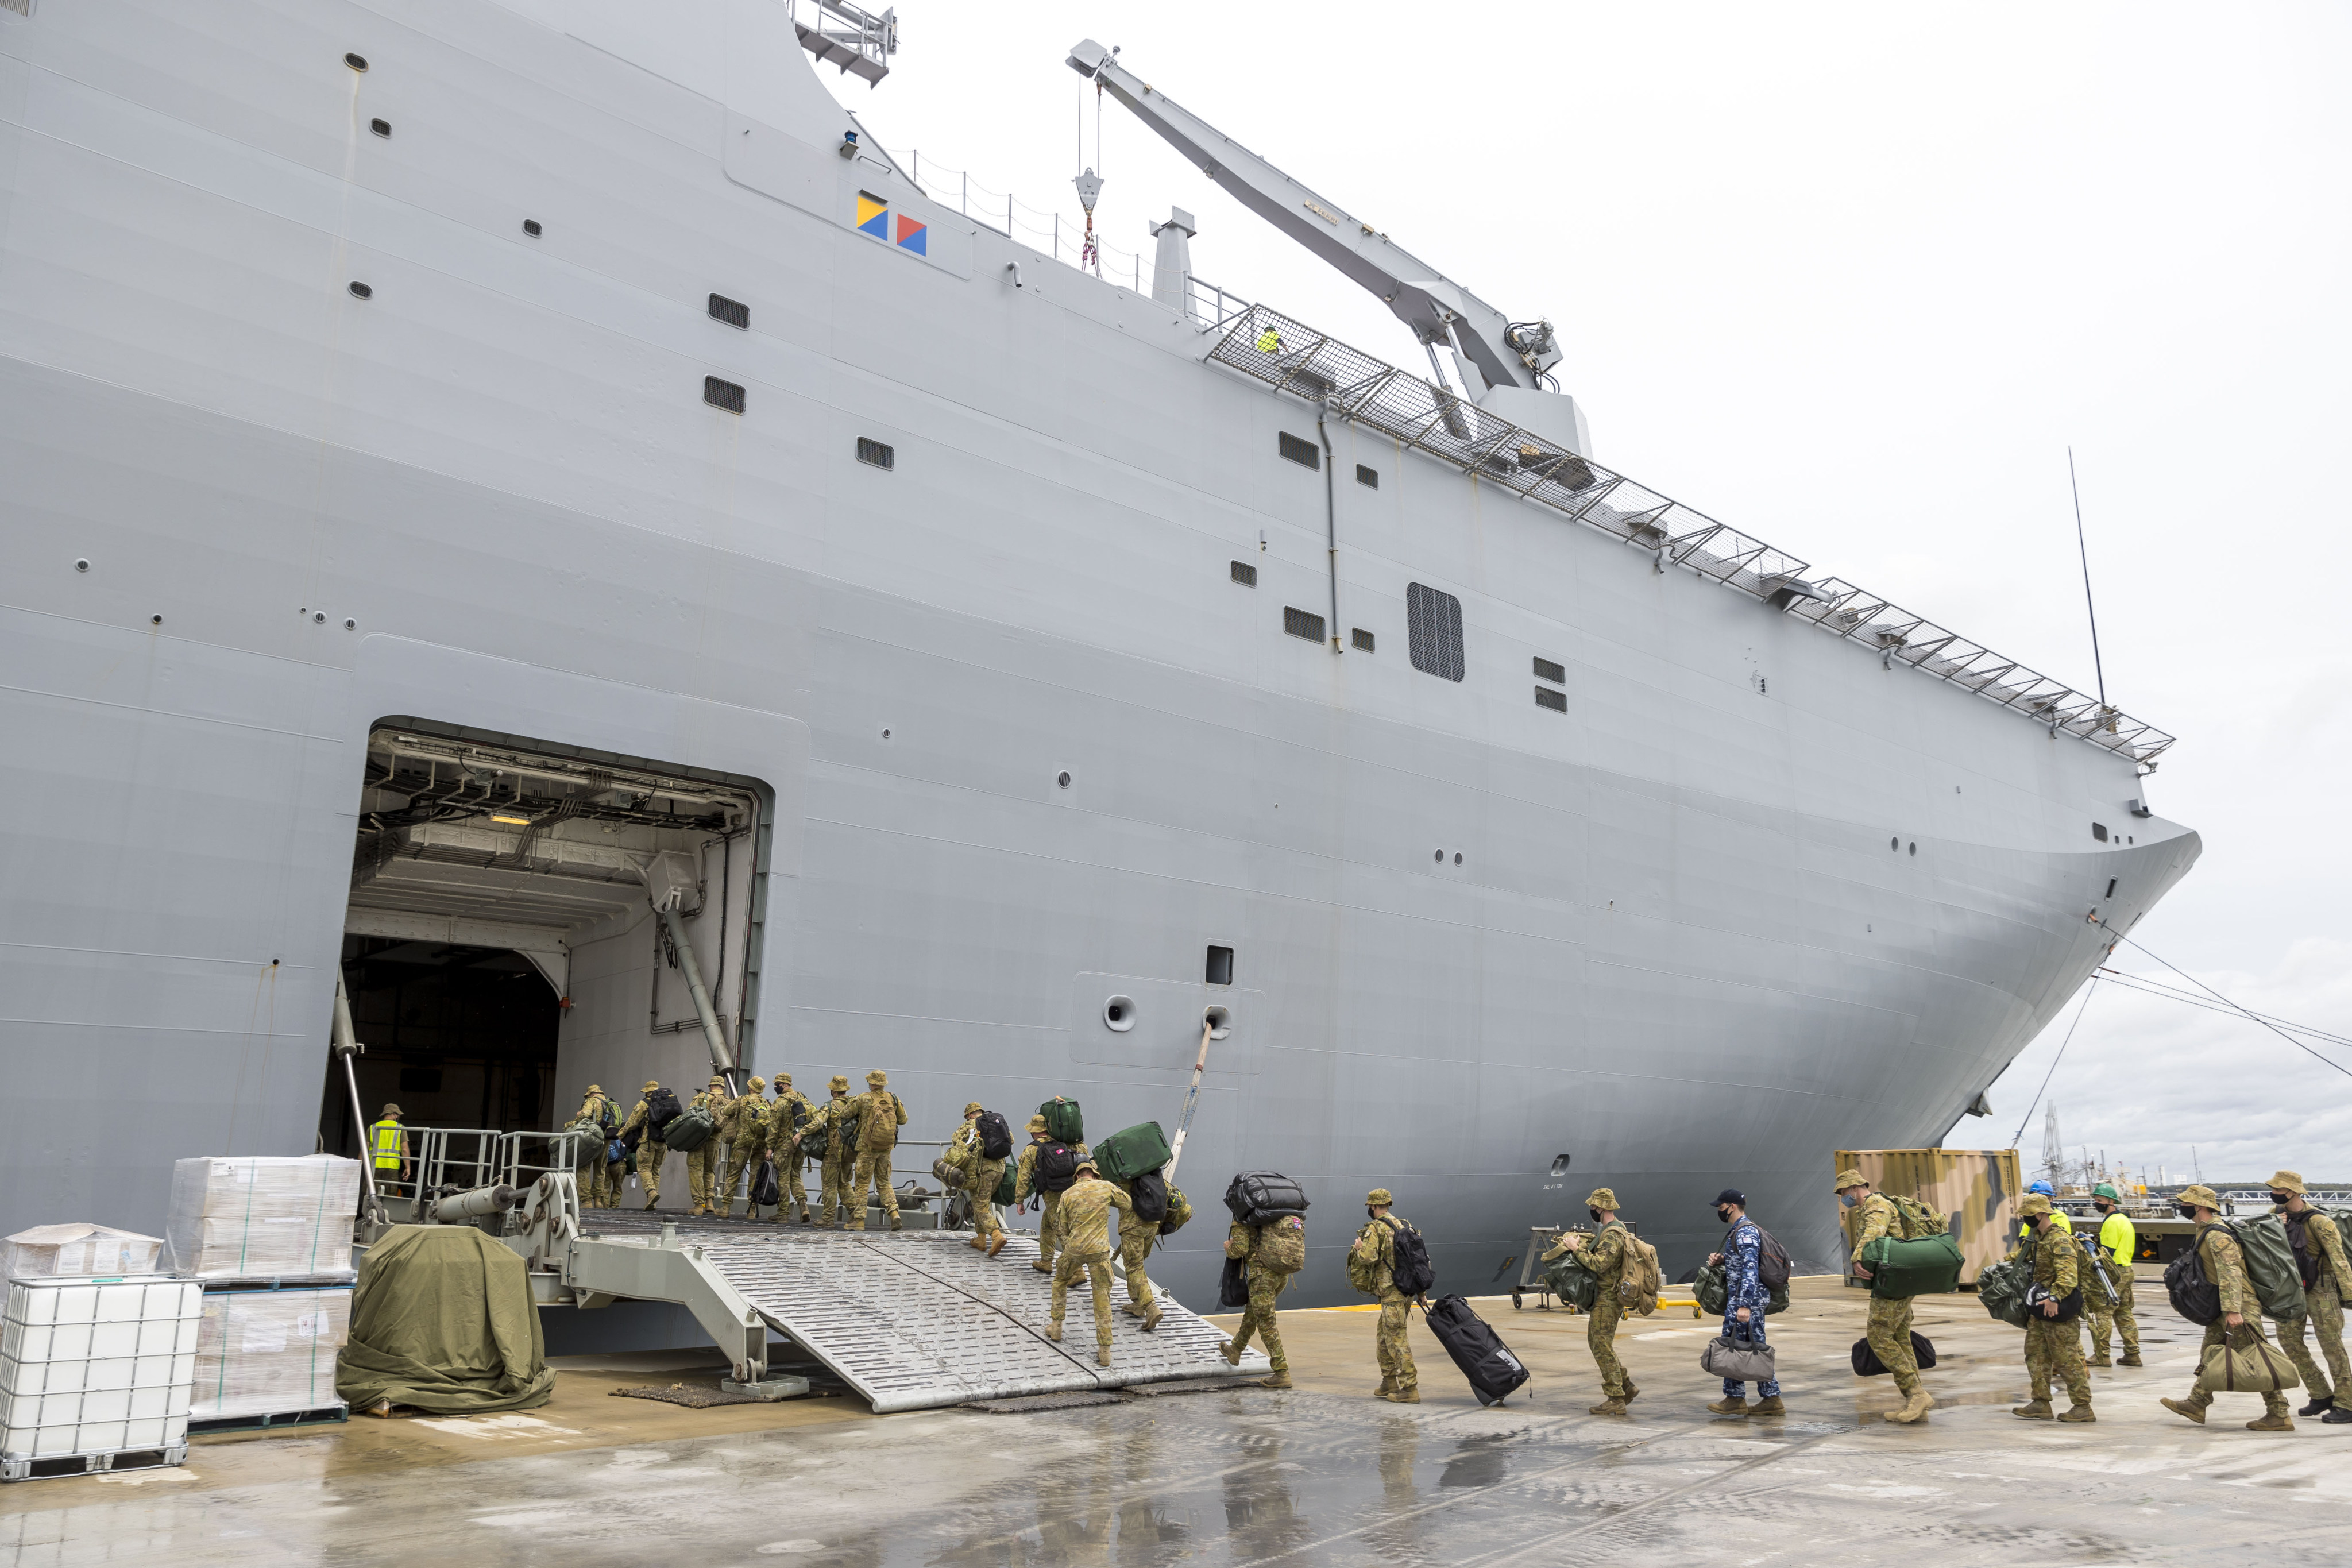 Australian soldiers load supplies onto HMAS Adelaide at the Port of Brisbane before departing for Tonga in January 2022, after a volcano eruption. Photo: Australia Defence Force via AP